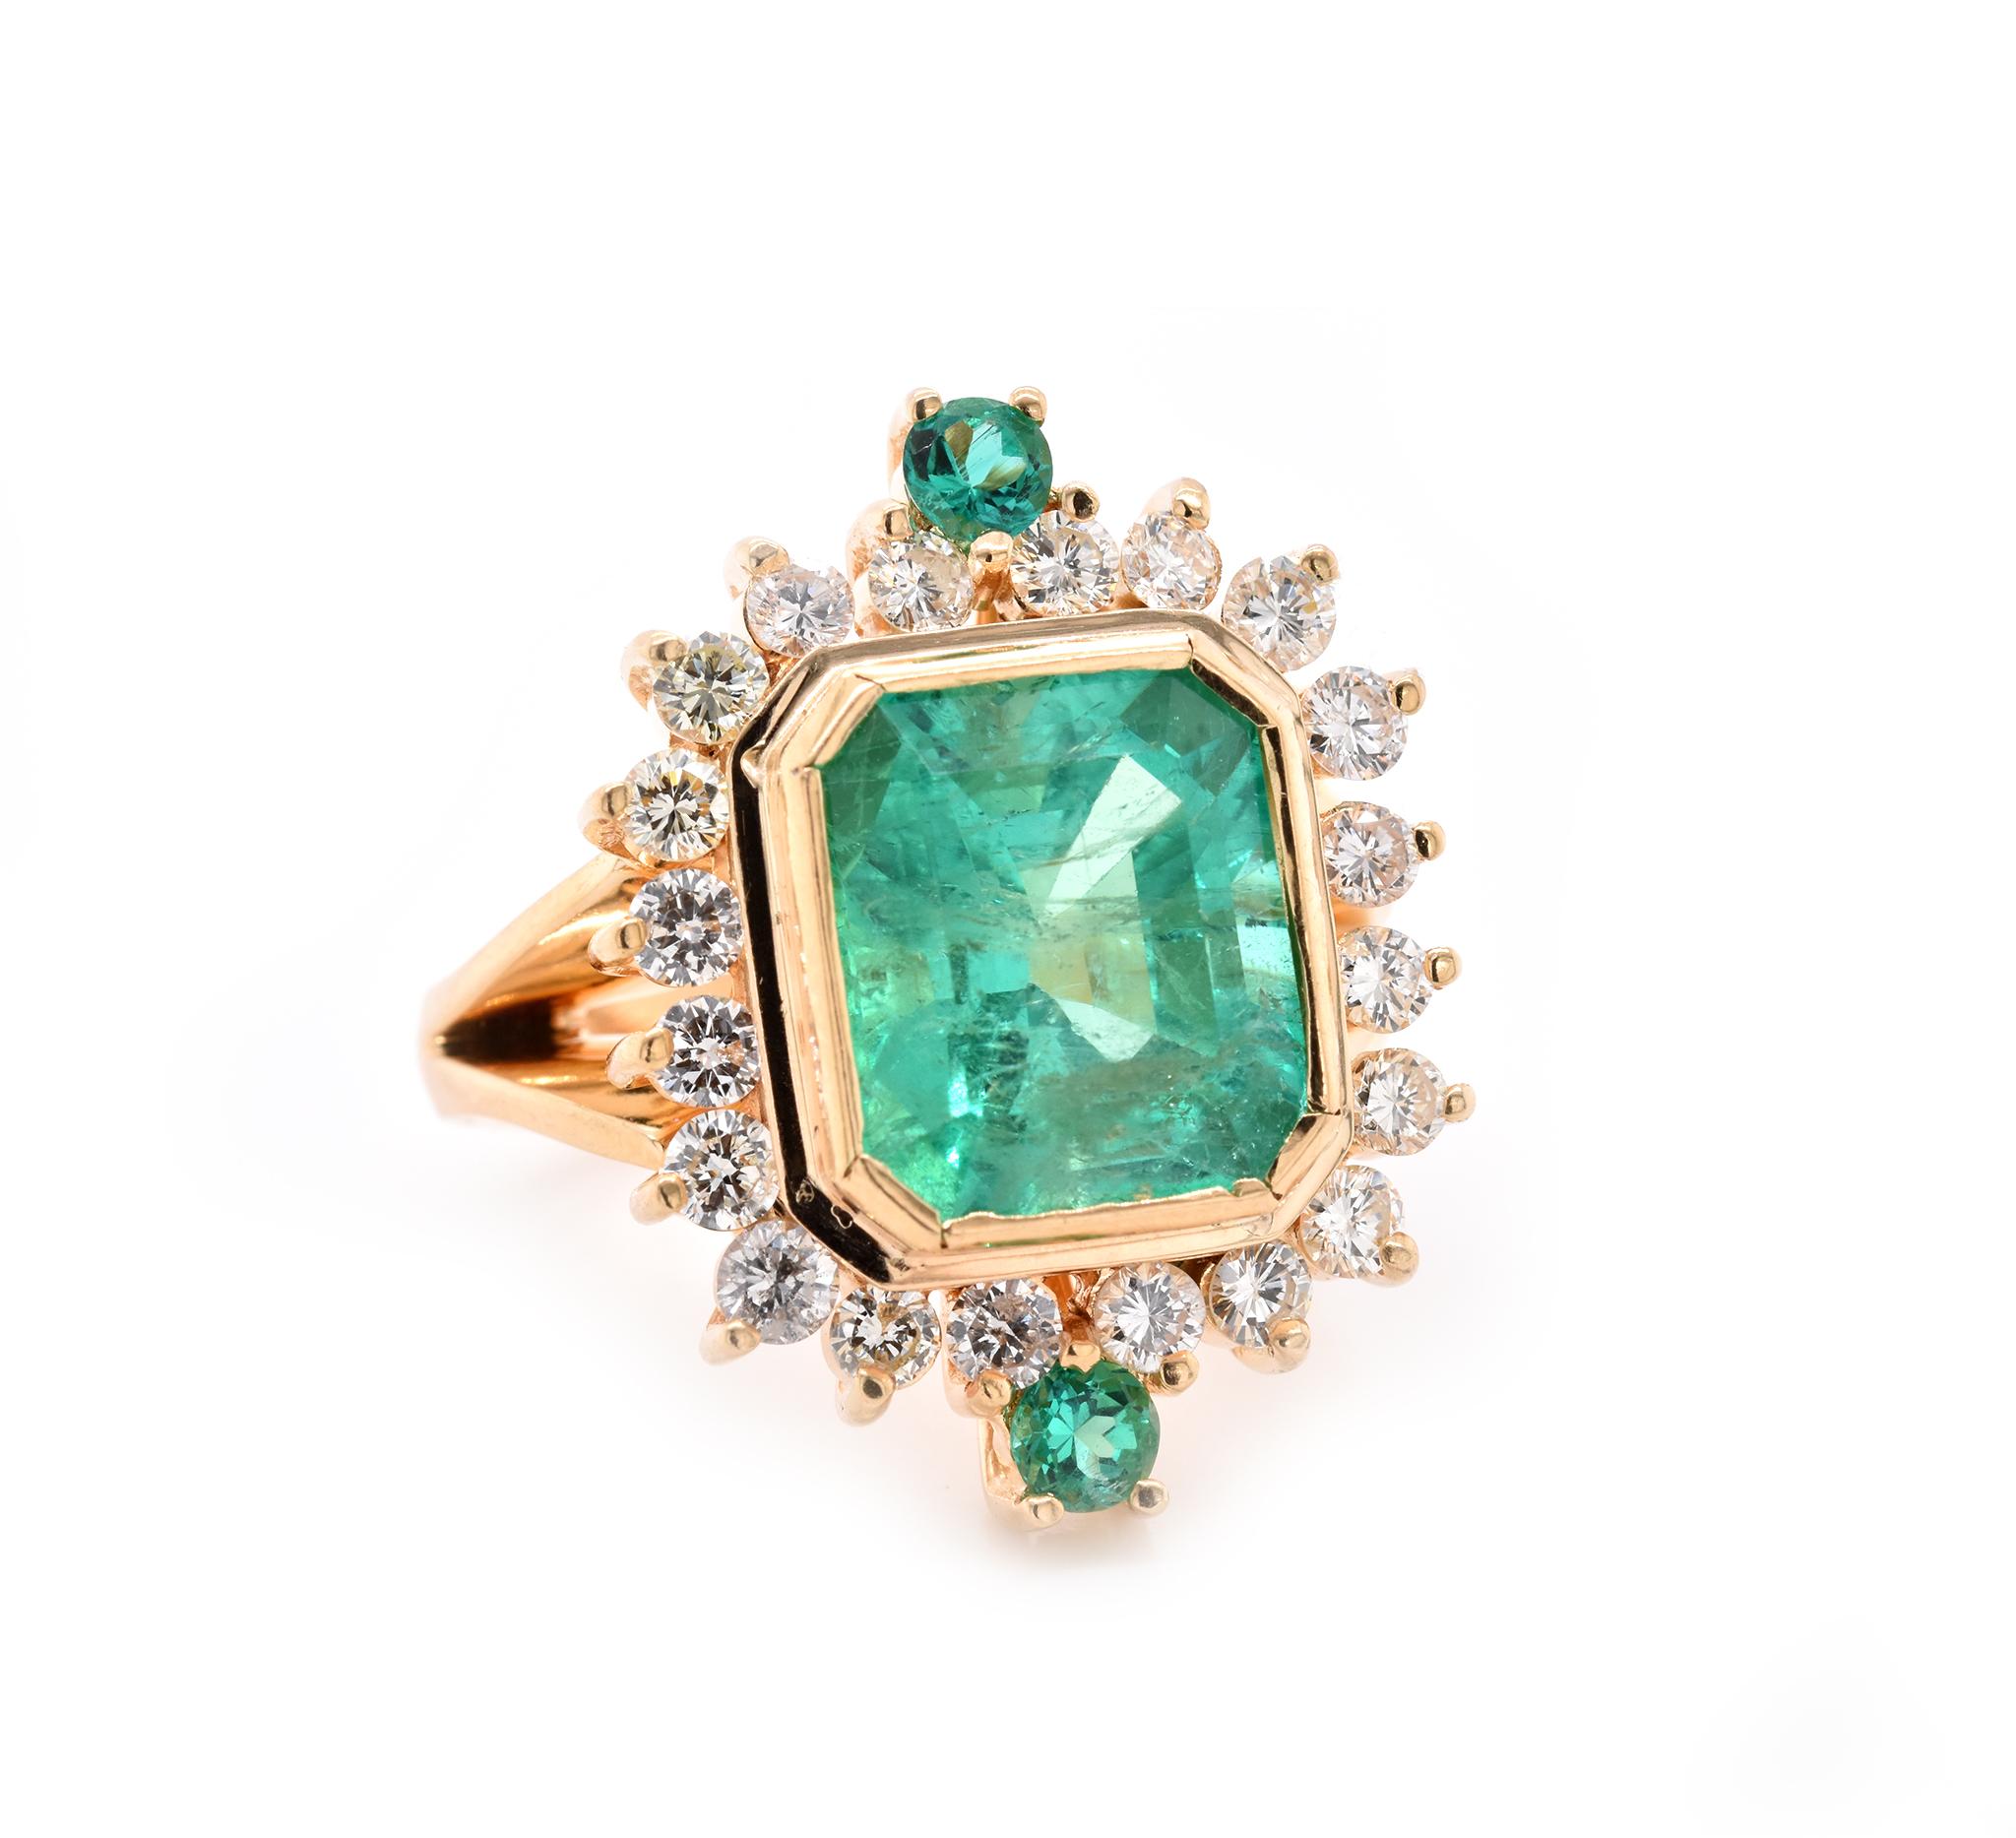 Designer: custom 
Material: 18K yellow gold
Gemstone: Emerald = 8.37ct
Diamond: 20 round brilliant cut = 1.60cttw
Color: G/H
Clarity: SI
Ring Size: 8 (please allow up to 2 additional business days for sizing requests)
Dimensions: ring top measures